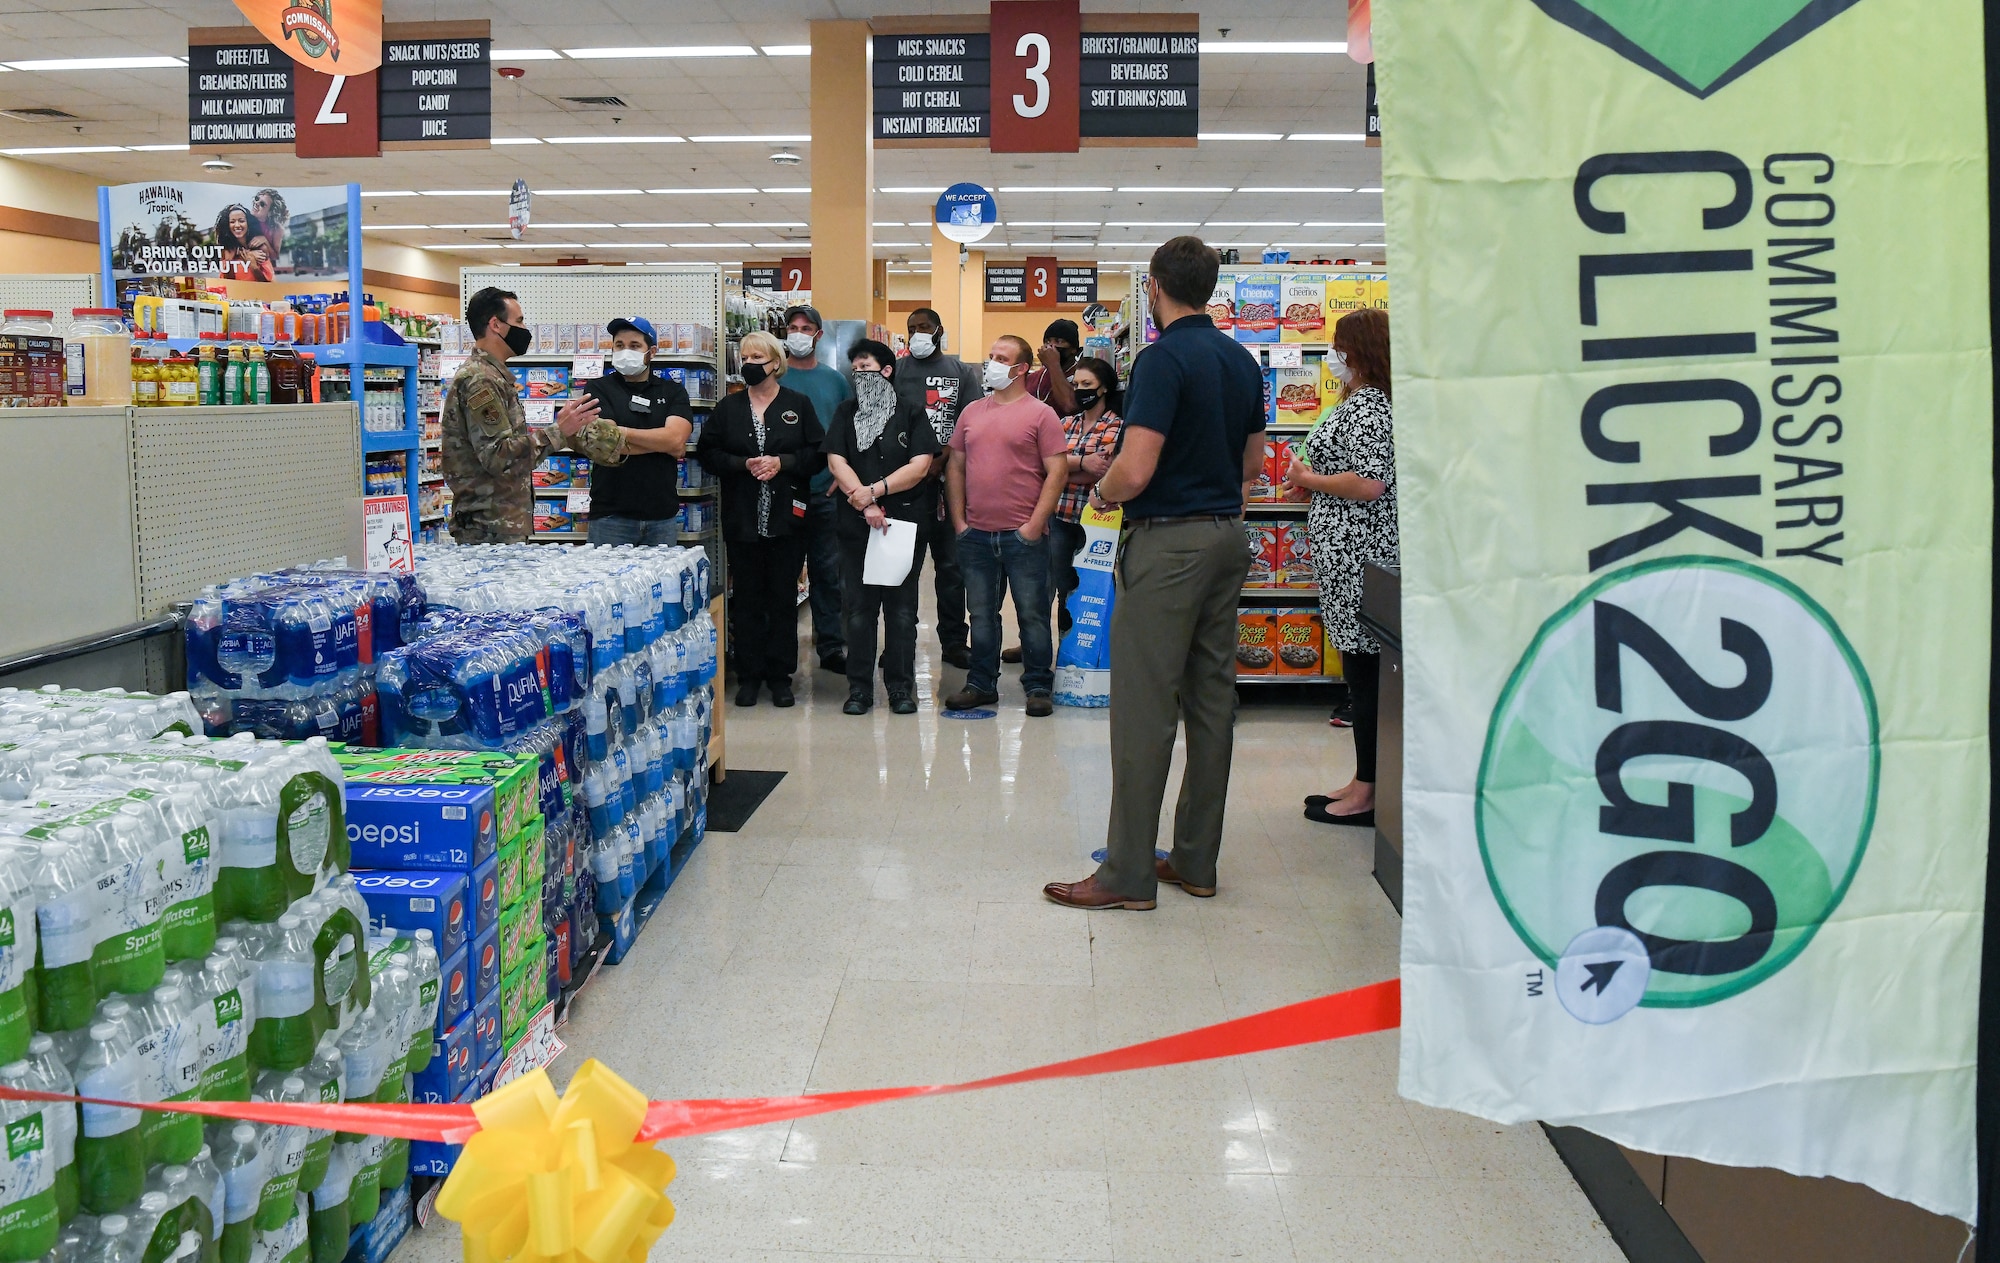 Col. Jeffrey Geraghty, left, commander of Arnold Engineering Development Complex headquartered at Arnold Air Force Base, Tenn., addresses the staff of the Arnold AFB Commissary before a ribbon cutting for the launch of the CLICK2GO online ordering and curbside pick-up service at the commissary, Aug. 3, 2021. (U.S. Air Force photo by Jill Pickett)